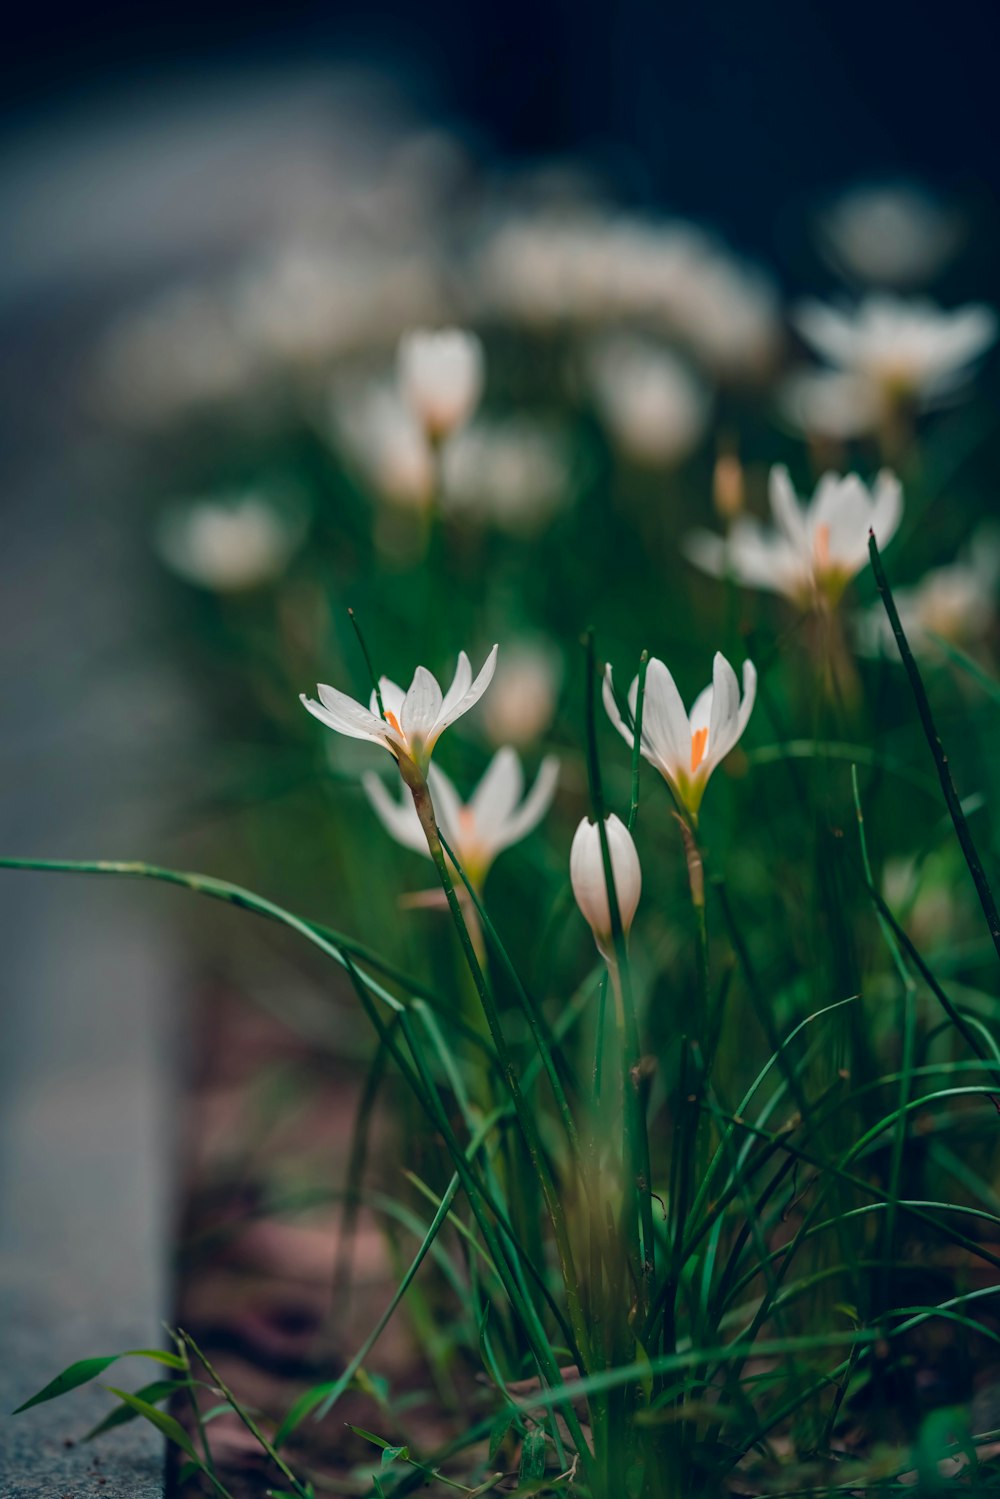 selective focus photo of white flowers